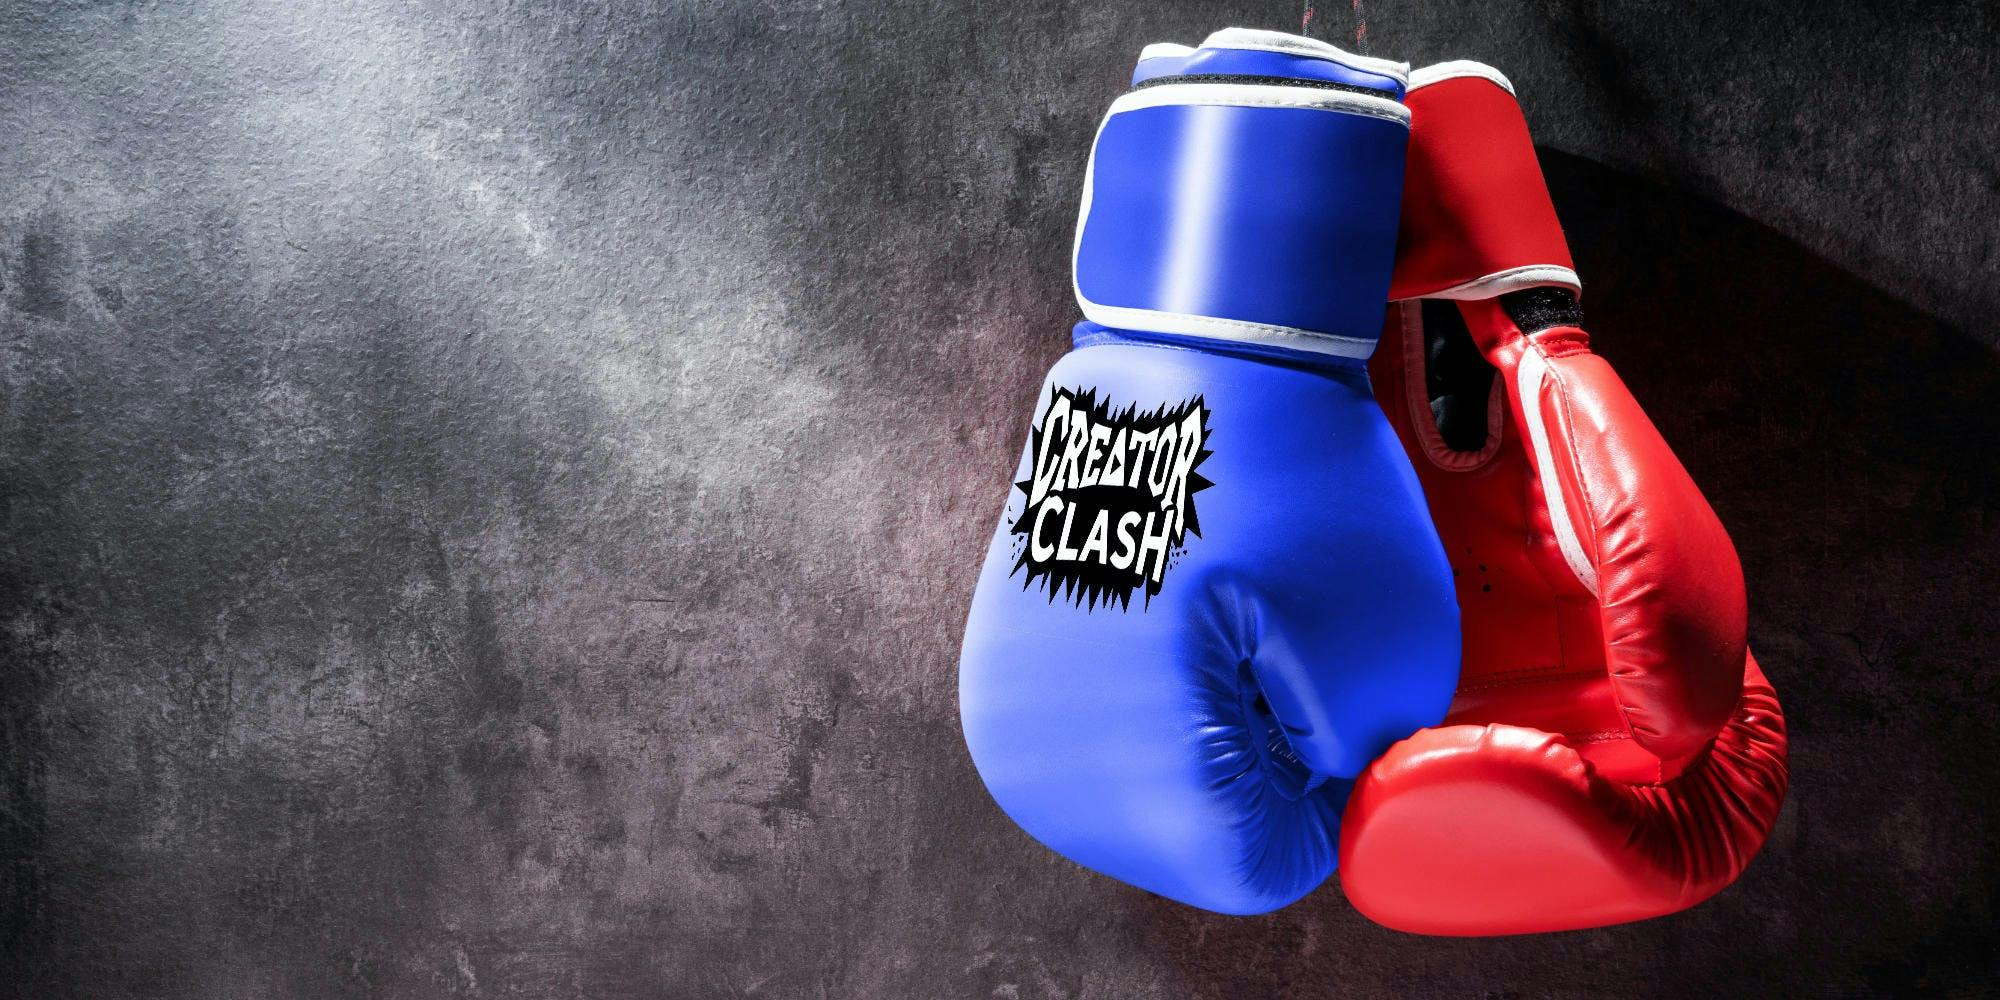 Creator Clash takes the cash-grabbing and clout-chasing out of influencer boxing